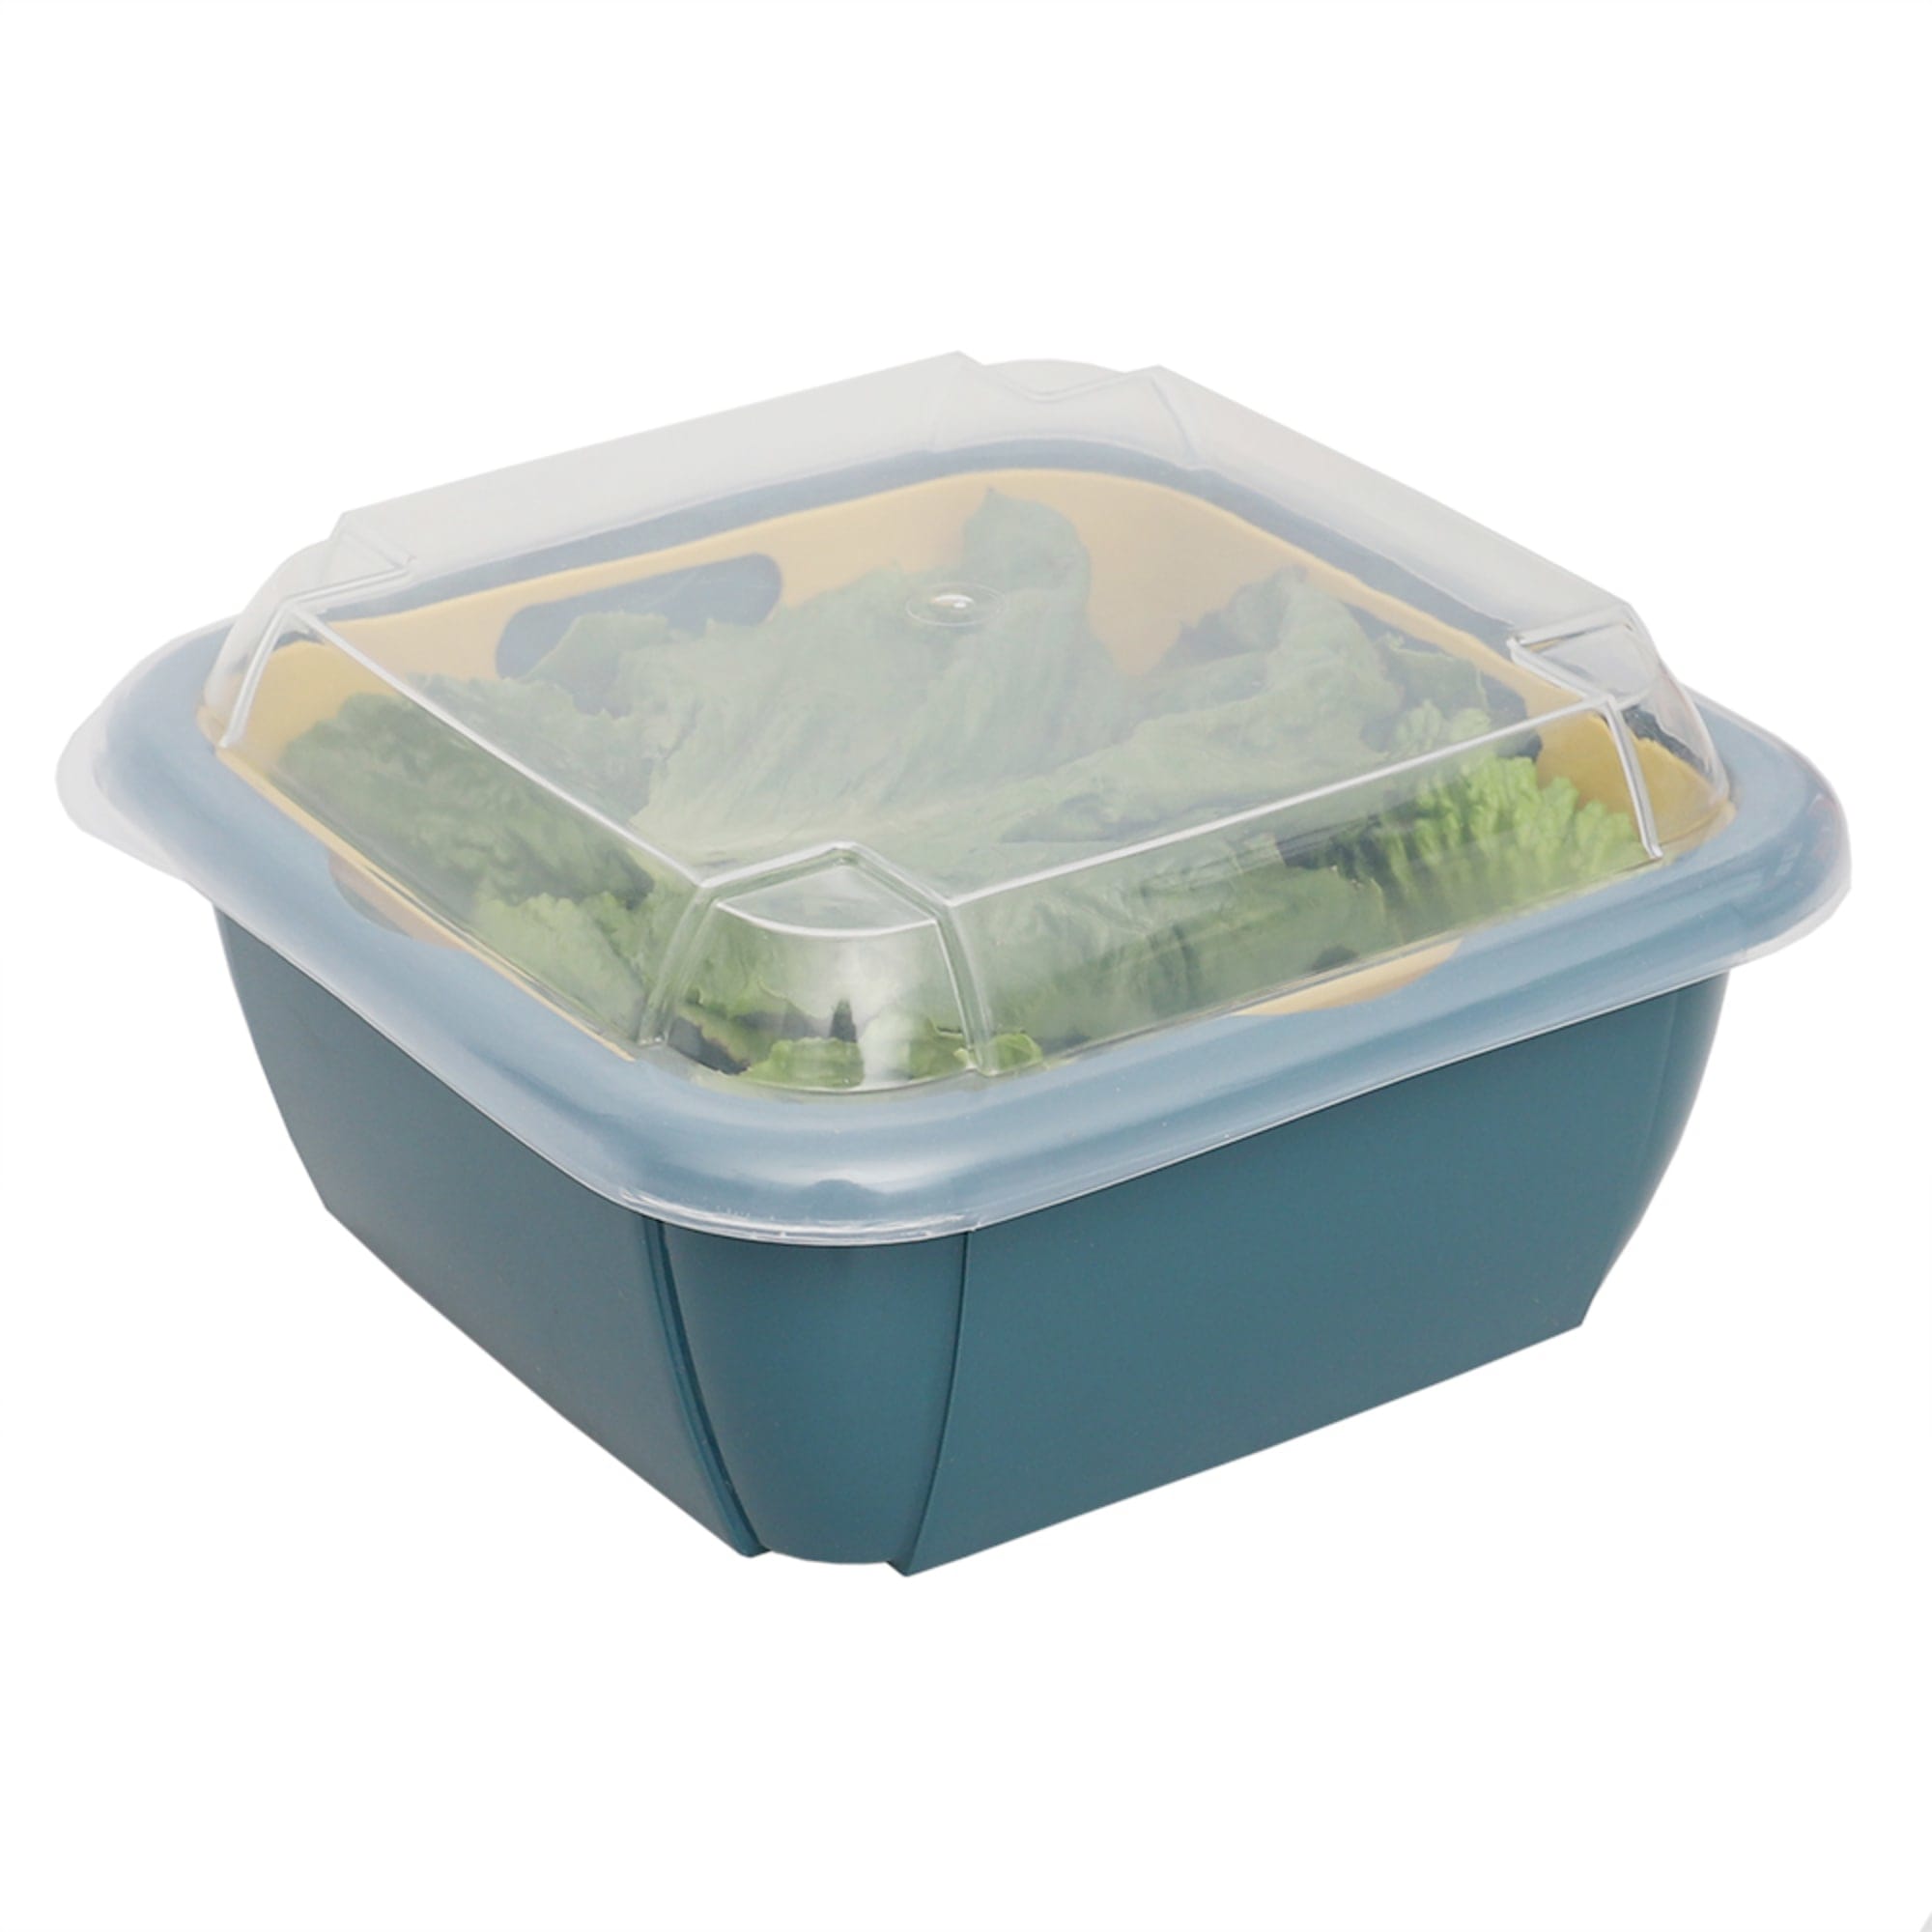 Home Basics Plastic Container with Strainer Basket and Clear Lid, Multi-Color $2.00 EACH, CASE PACK OF 12